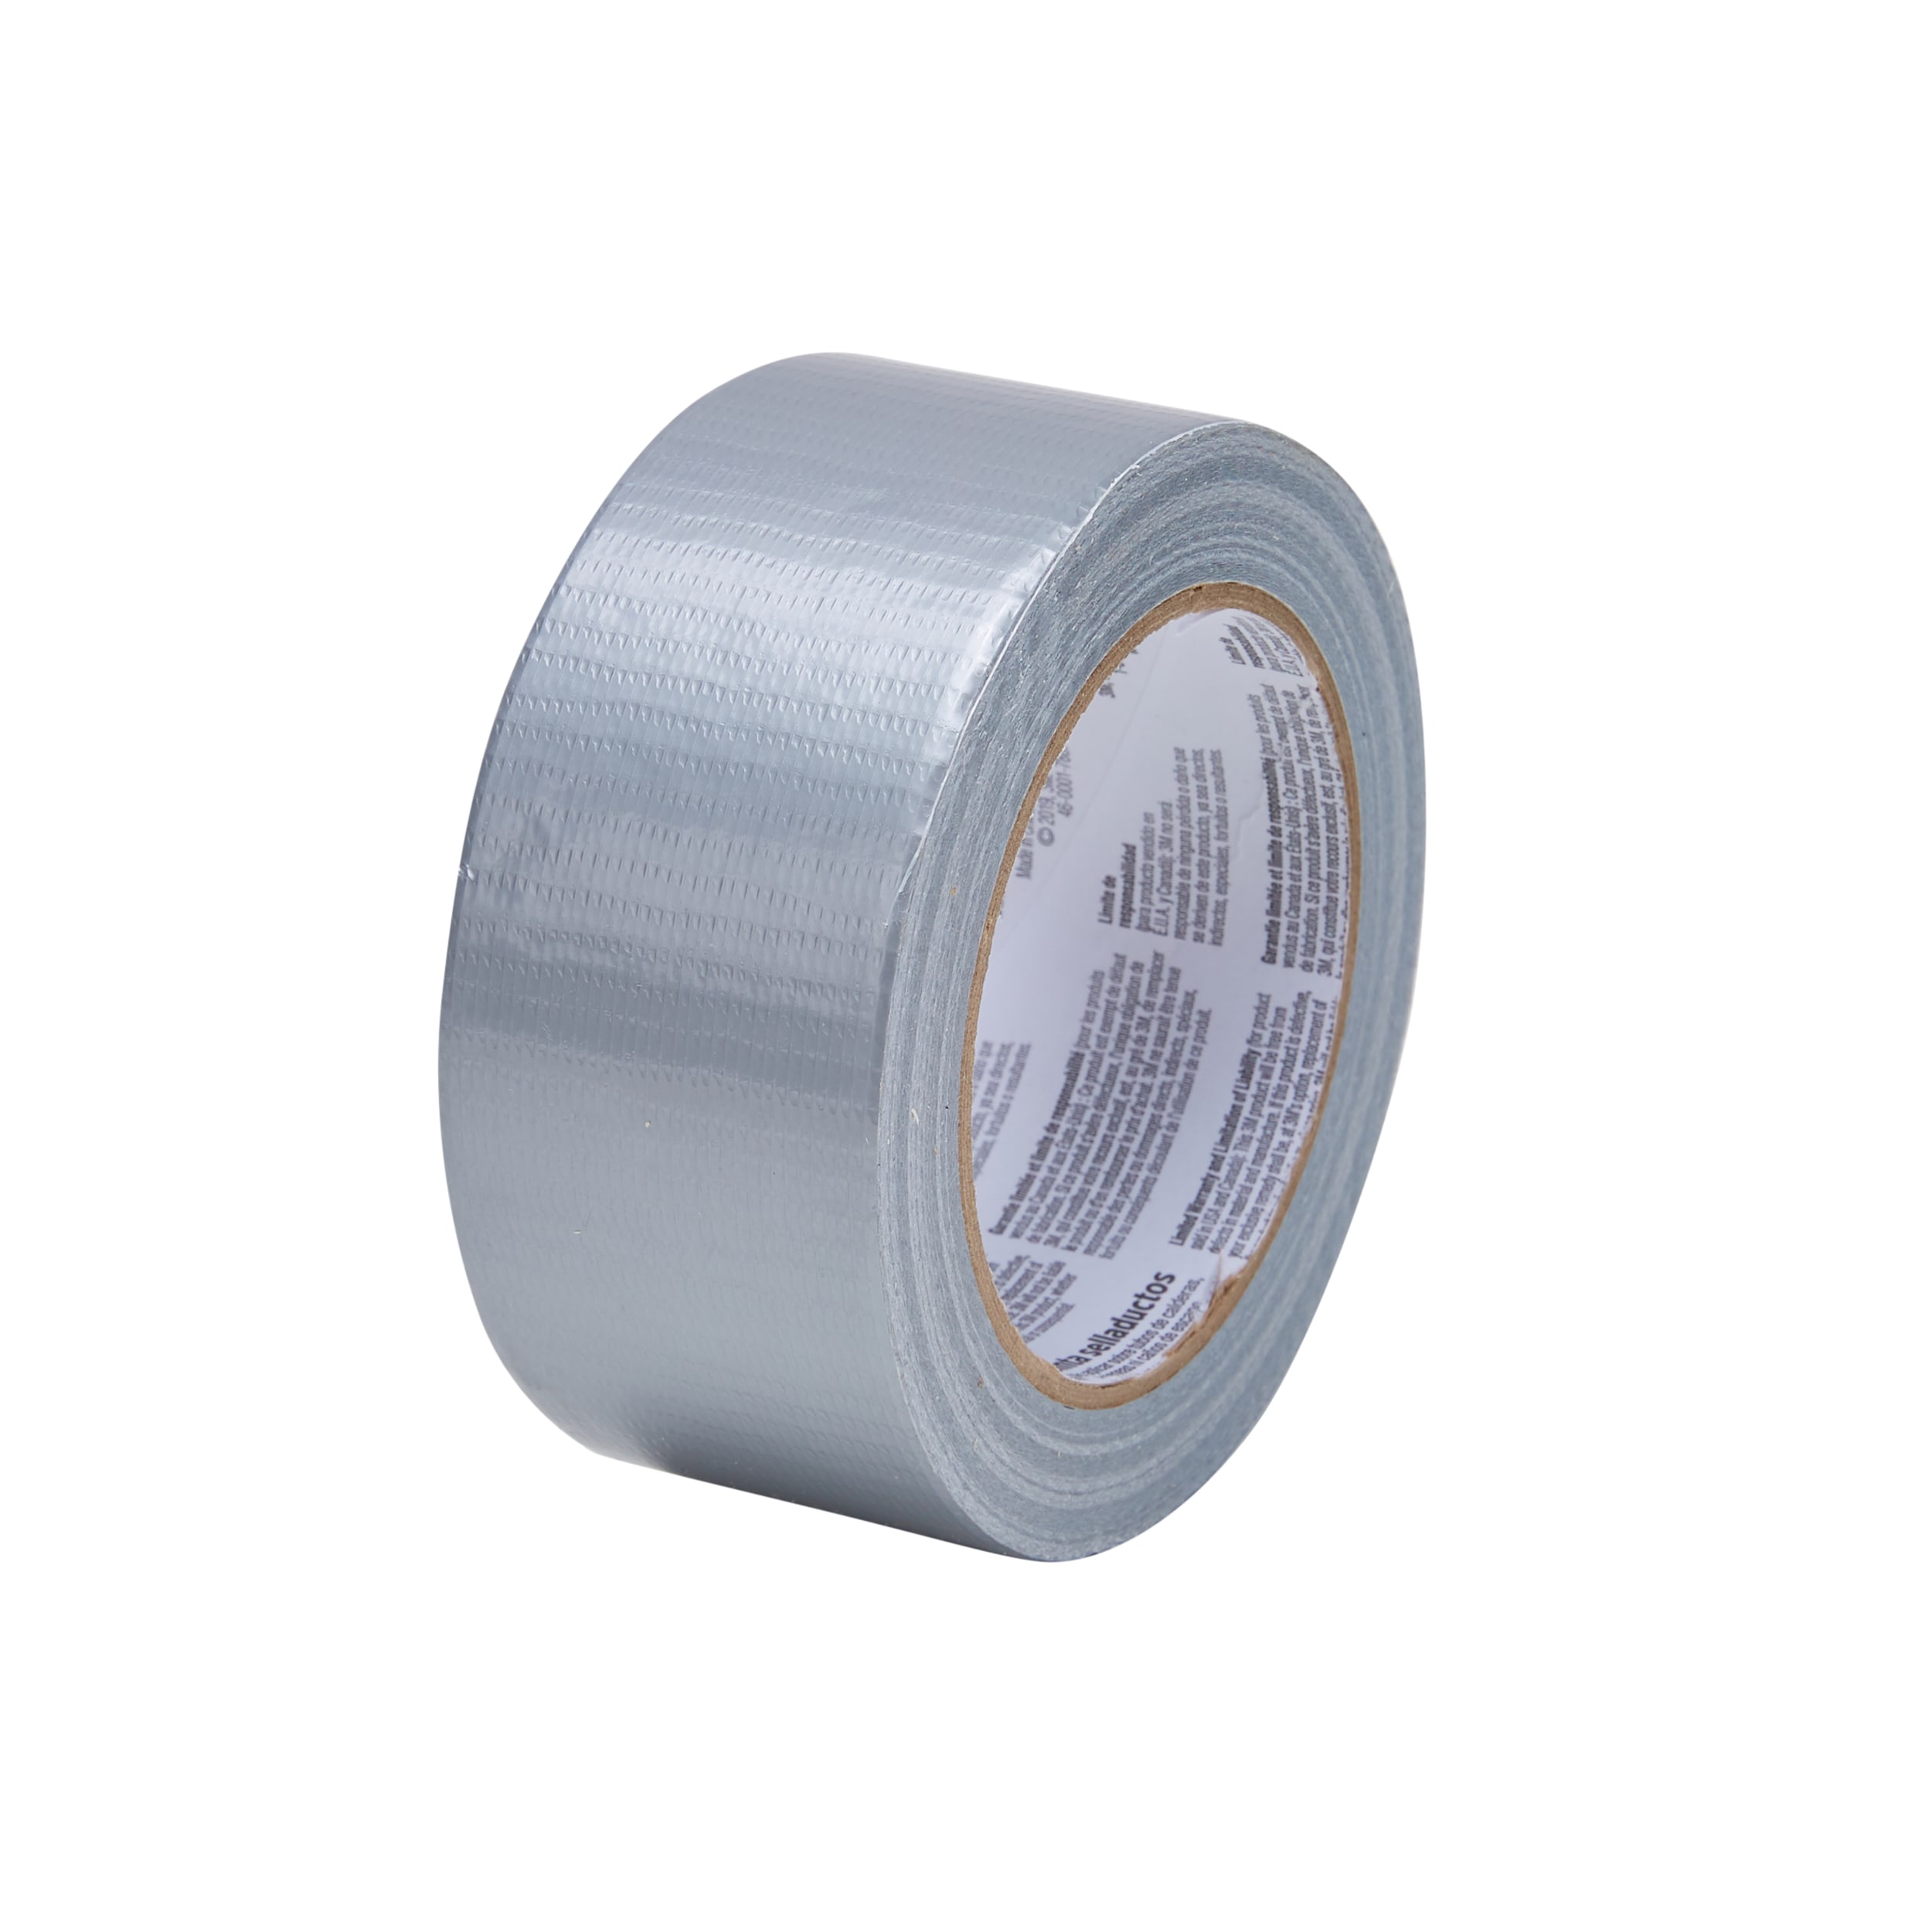 MAT Duct Tape Silver (Gray) Industrial Grade, 12 inch x 60 yds. Waterproof,  UV Resistant for Crafts, Home Improvement, Repairs, & Projects